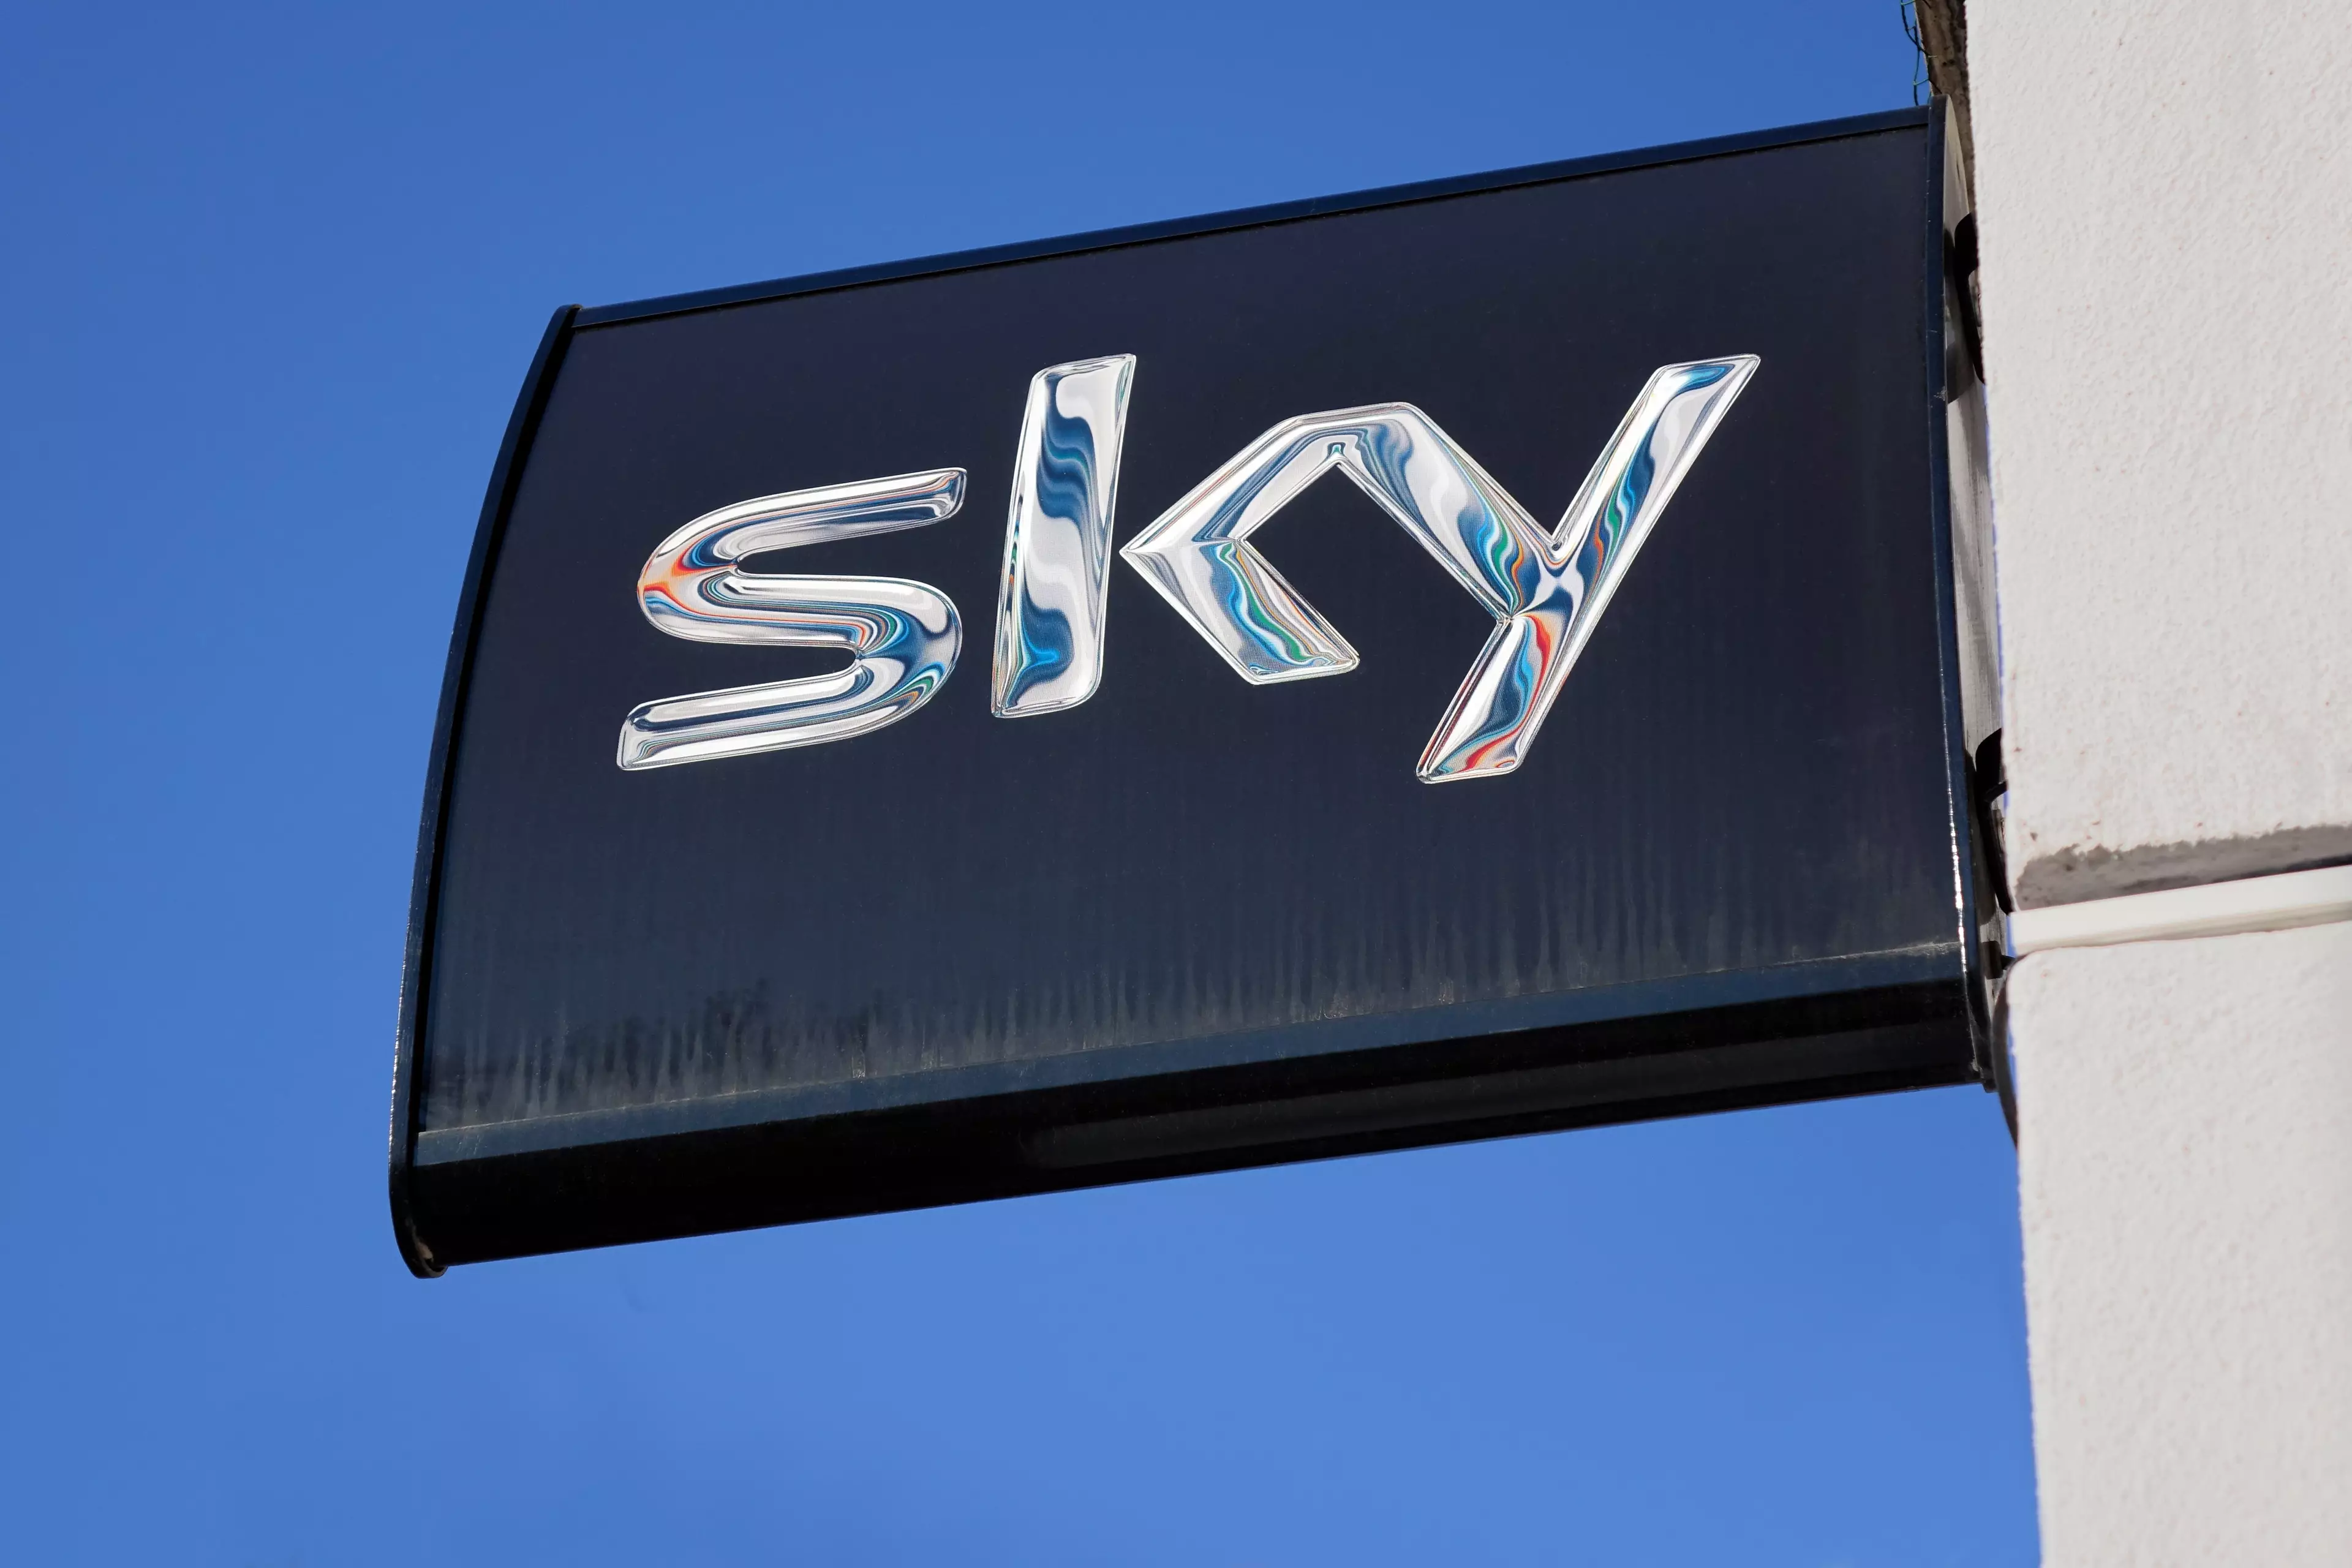 Sky customers in the UK will no longer be able to stream shows while in the EU.